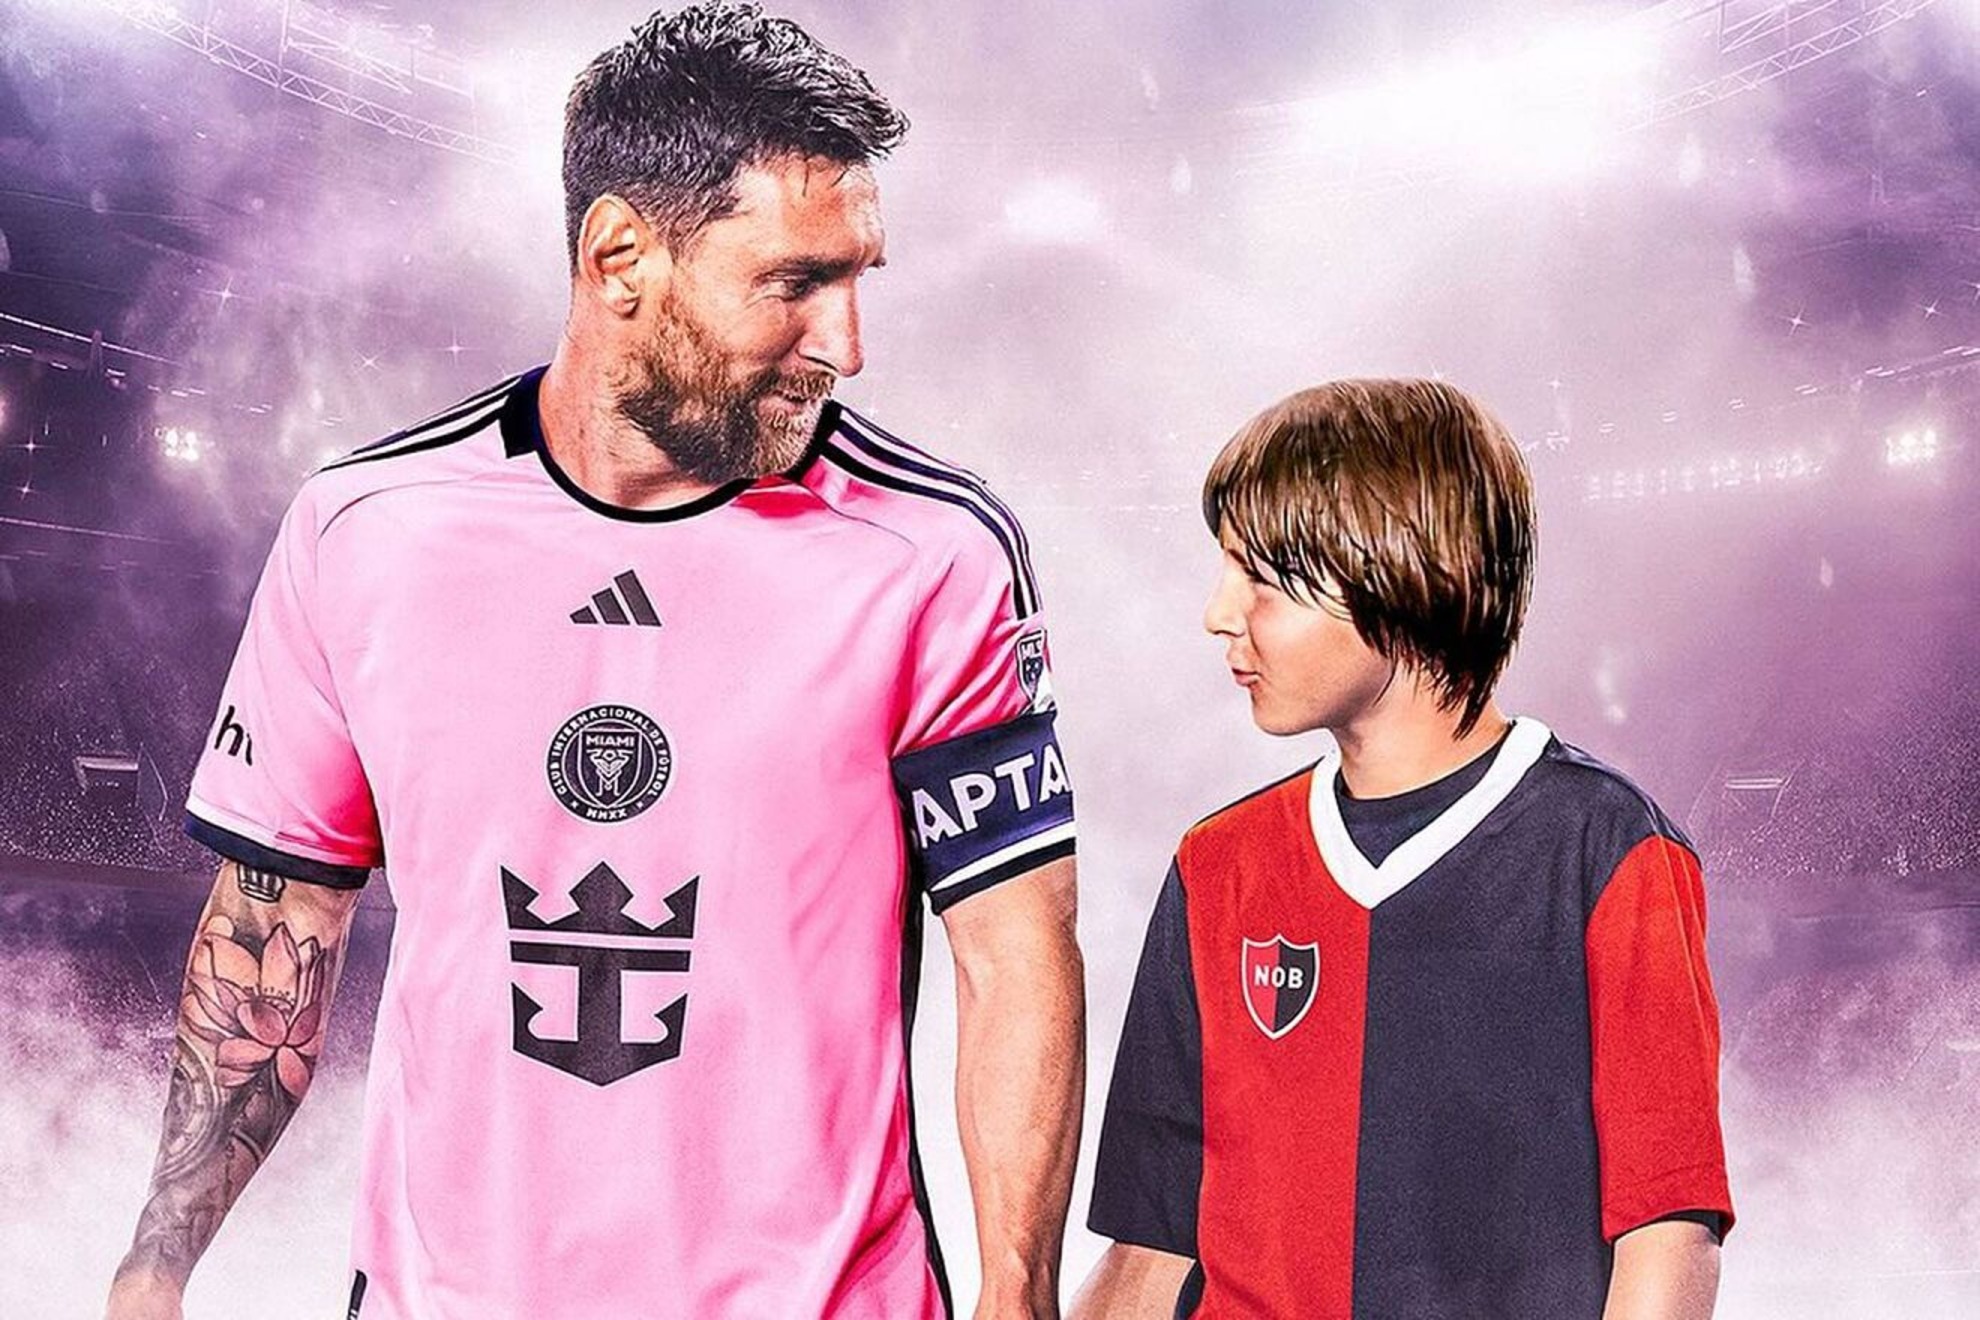 Montage between the current Lionel Messi and the Lionel Messi of Newells Old Boys